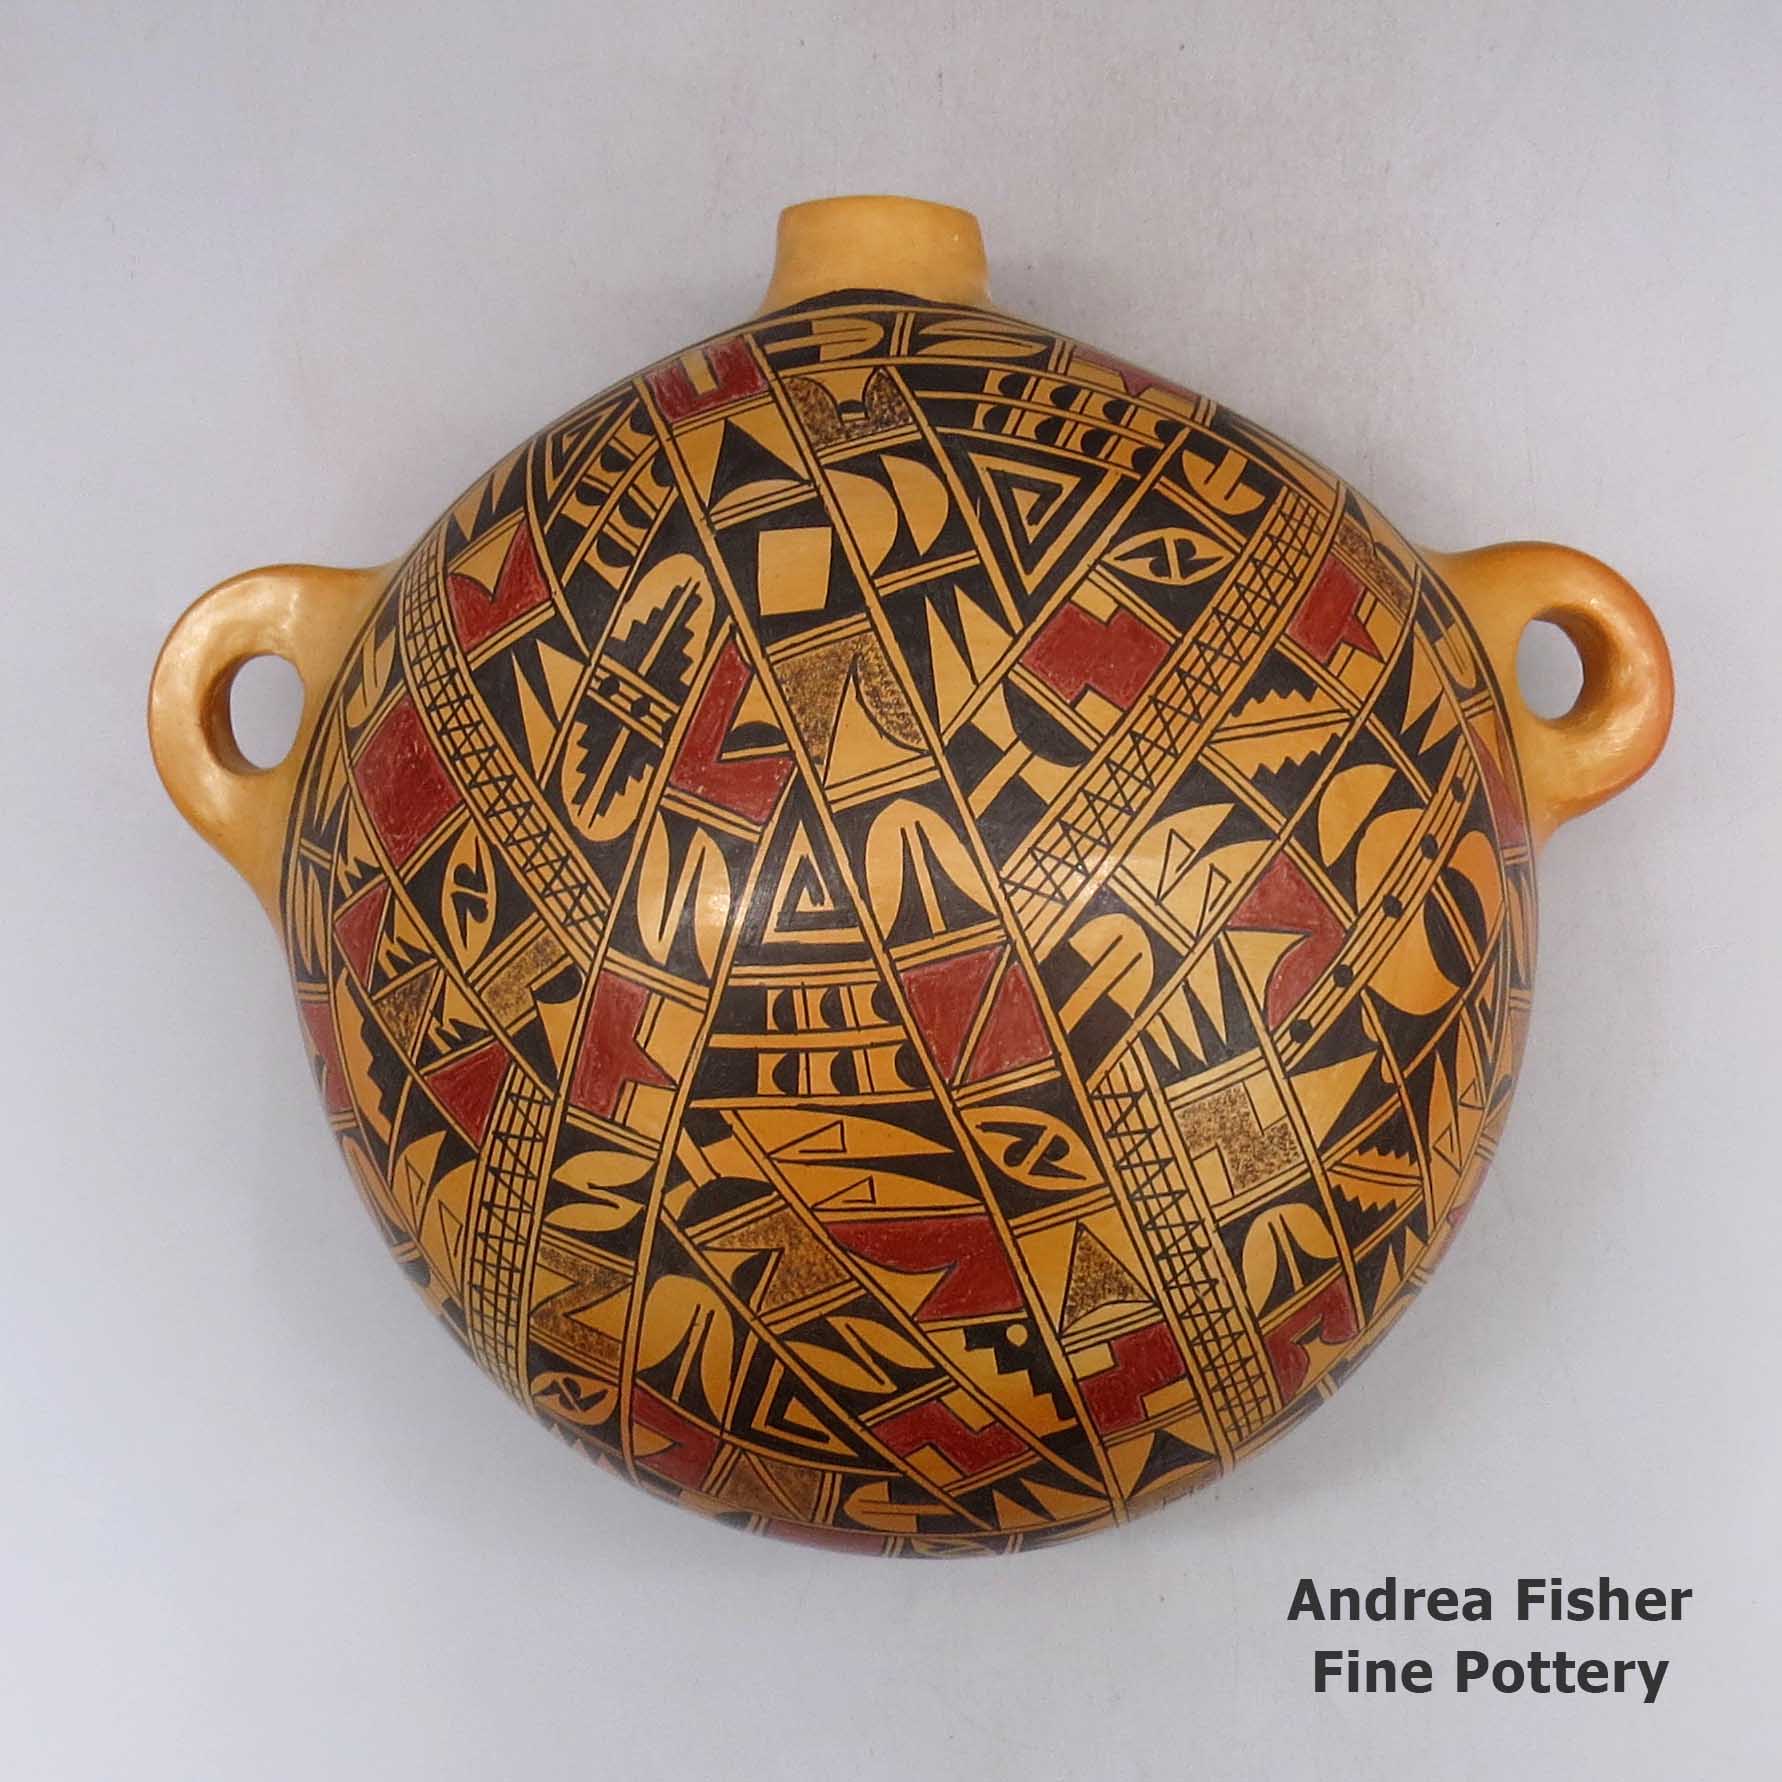 Polychrome canteen with geometric design and fire clouds made by Emma Naha of Hopi